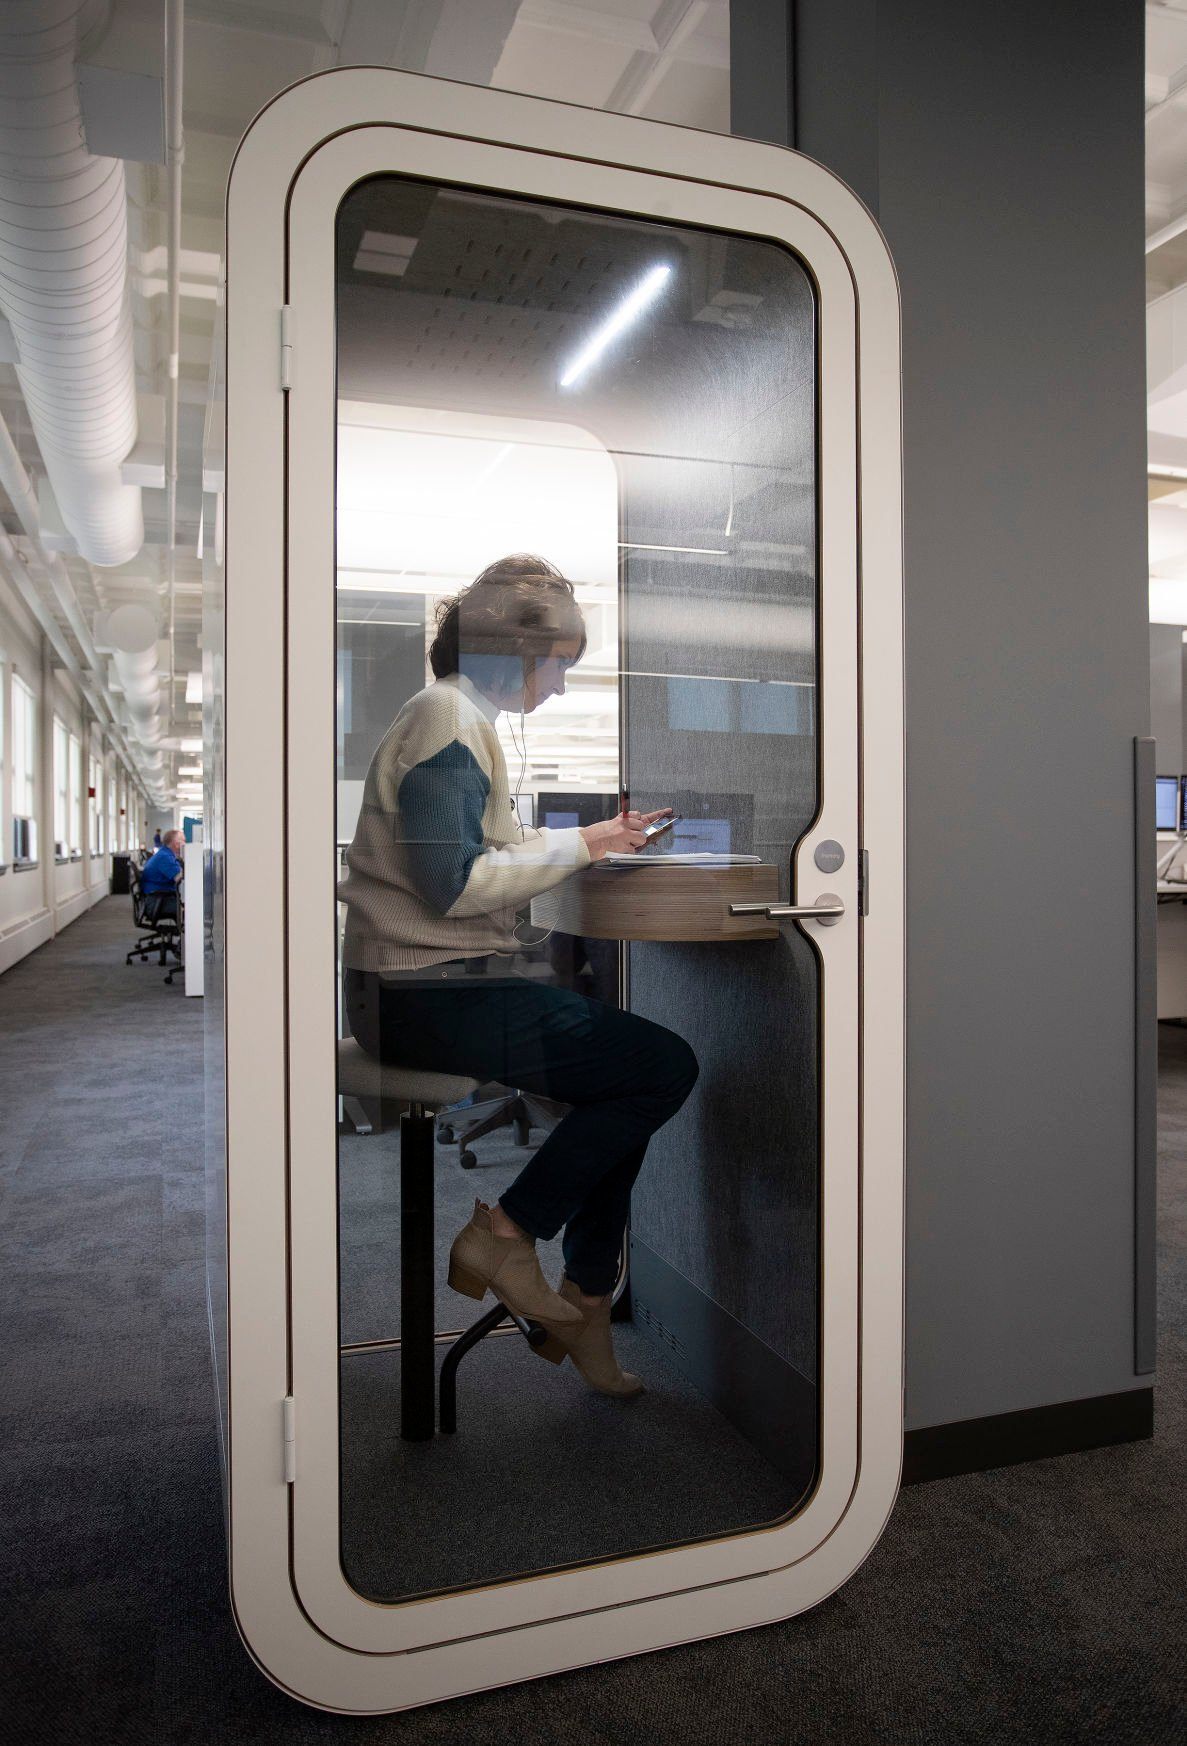 Tracy Bechen uses a sound-proof “phone booth” to take a call on Wednesday in the recently renovated building at 700 Locust St. in Dubuque.    PHOTO CREDIT: Stephen Gassman